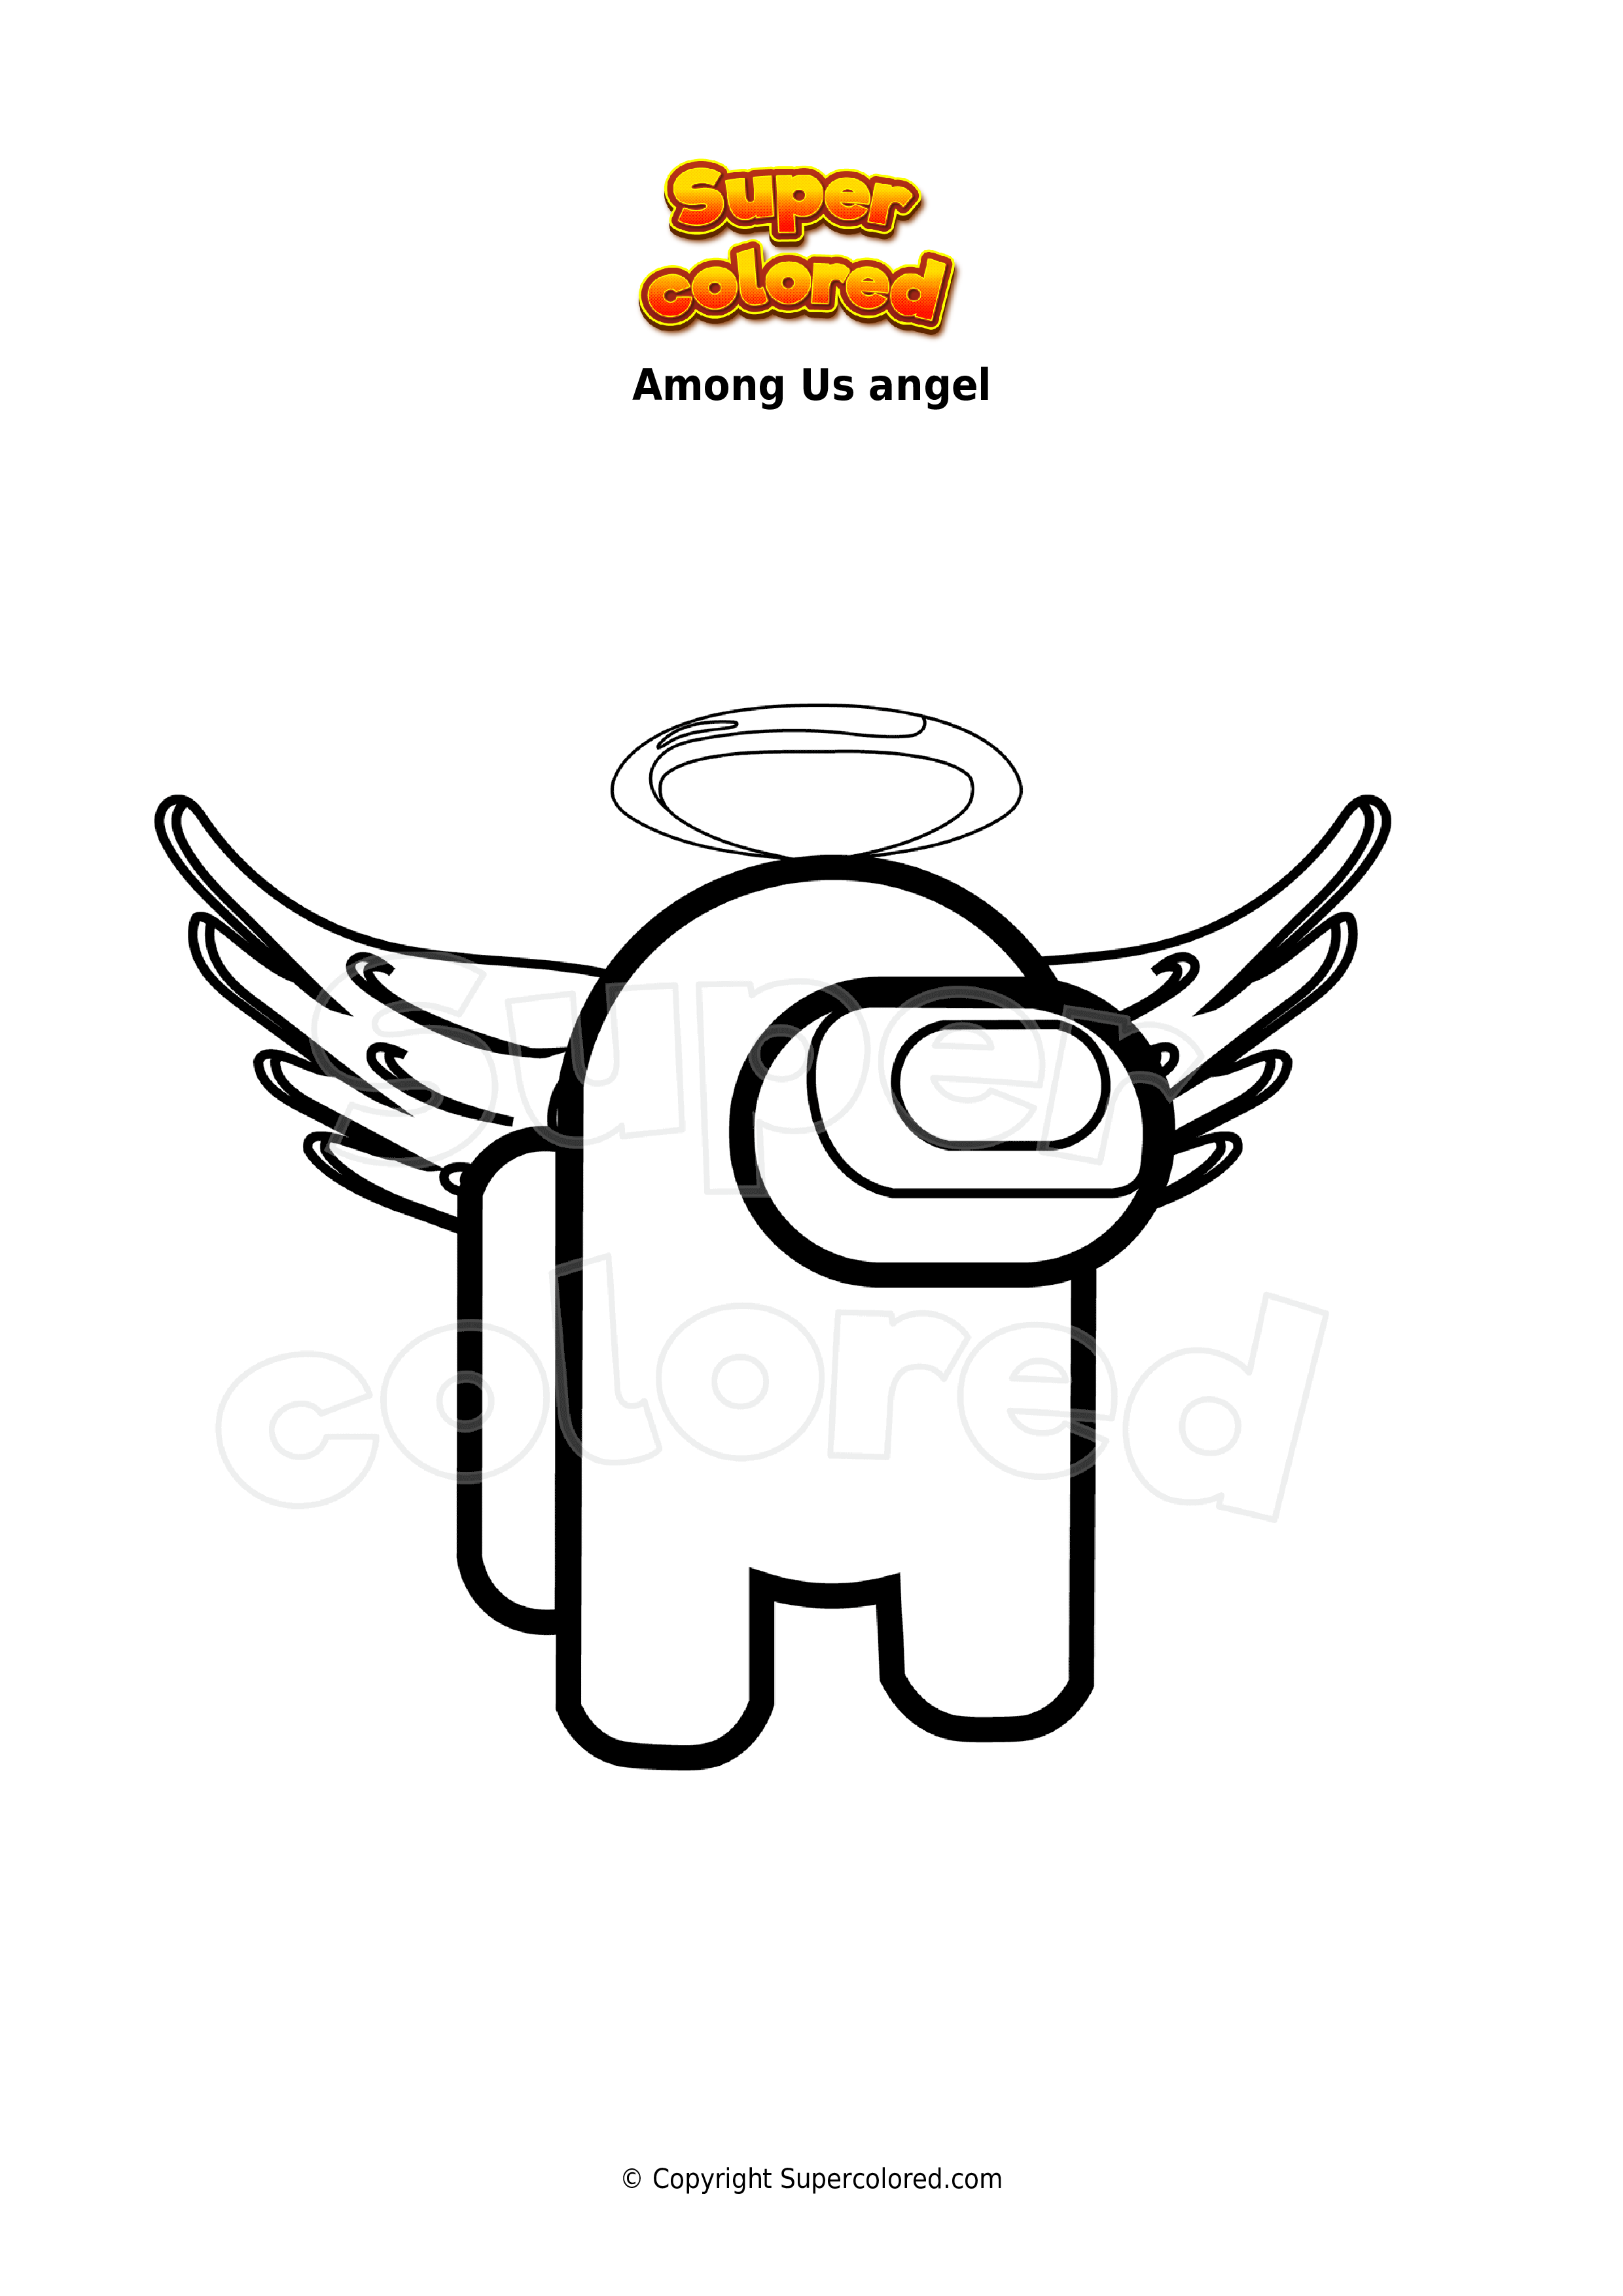 Coloring page Among Us angel   Supercolored.com